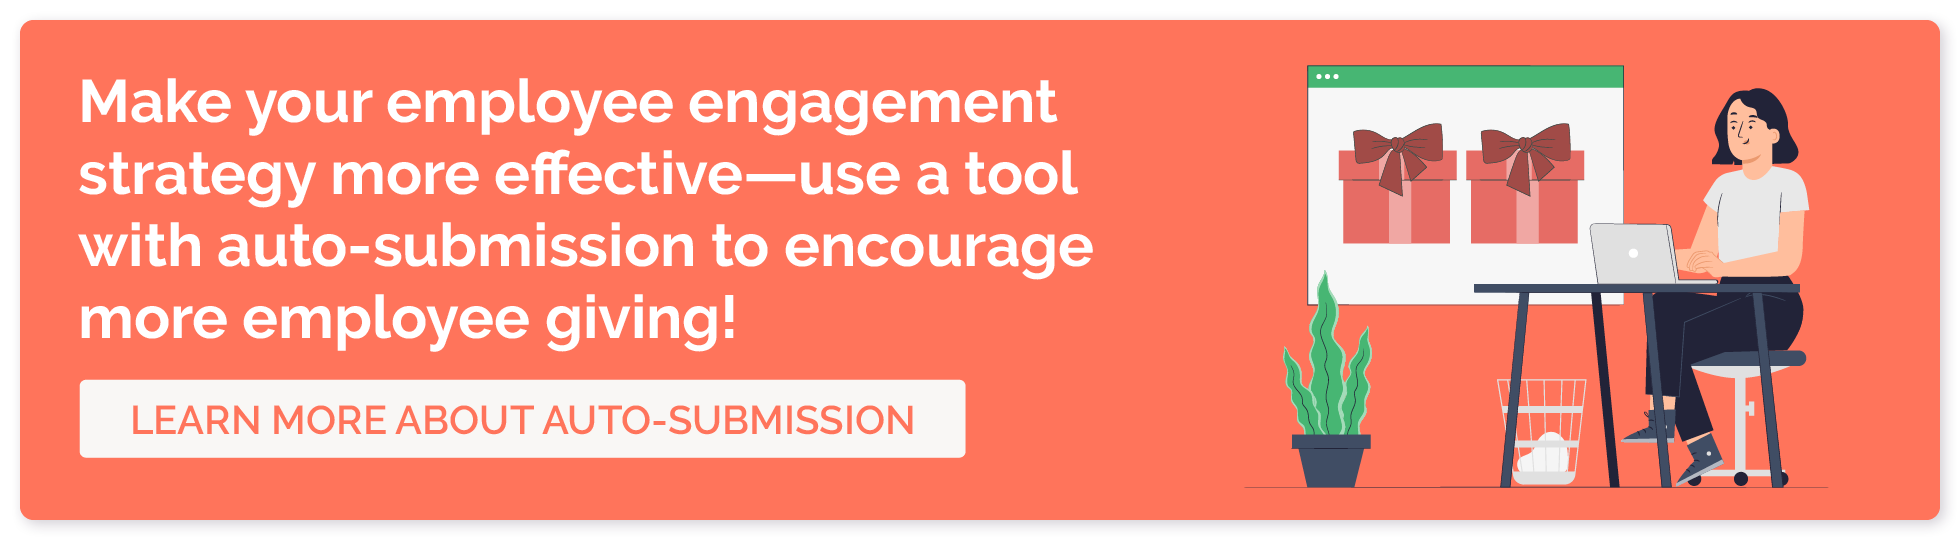 Click through and learn more about how auto-submission can positively impact your employee engagement efforts.